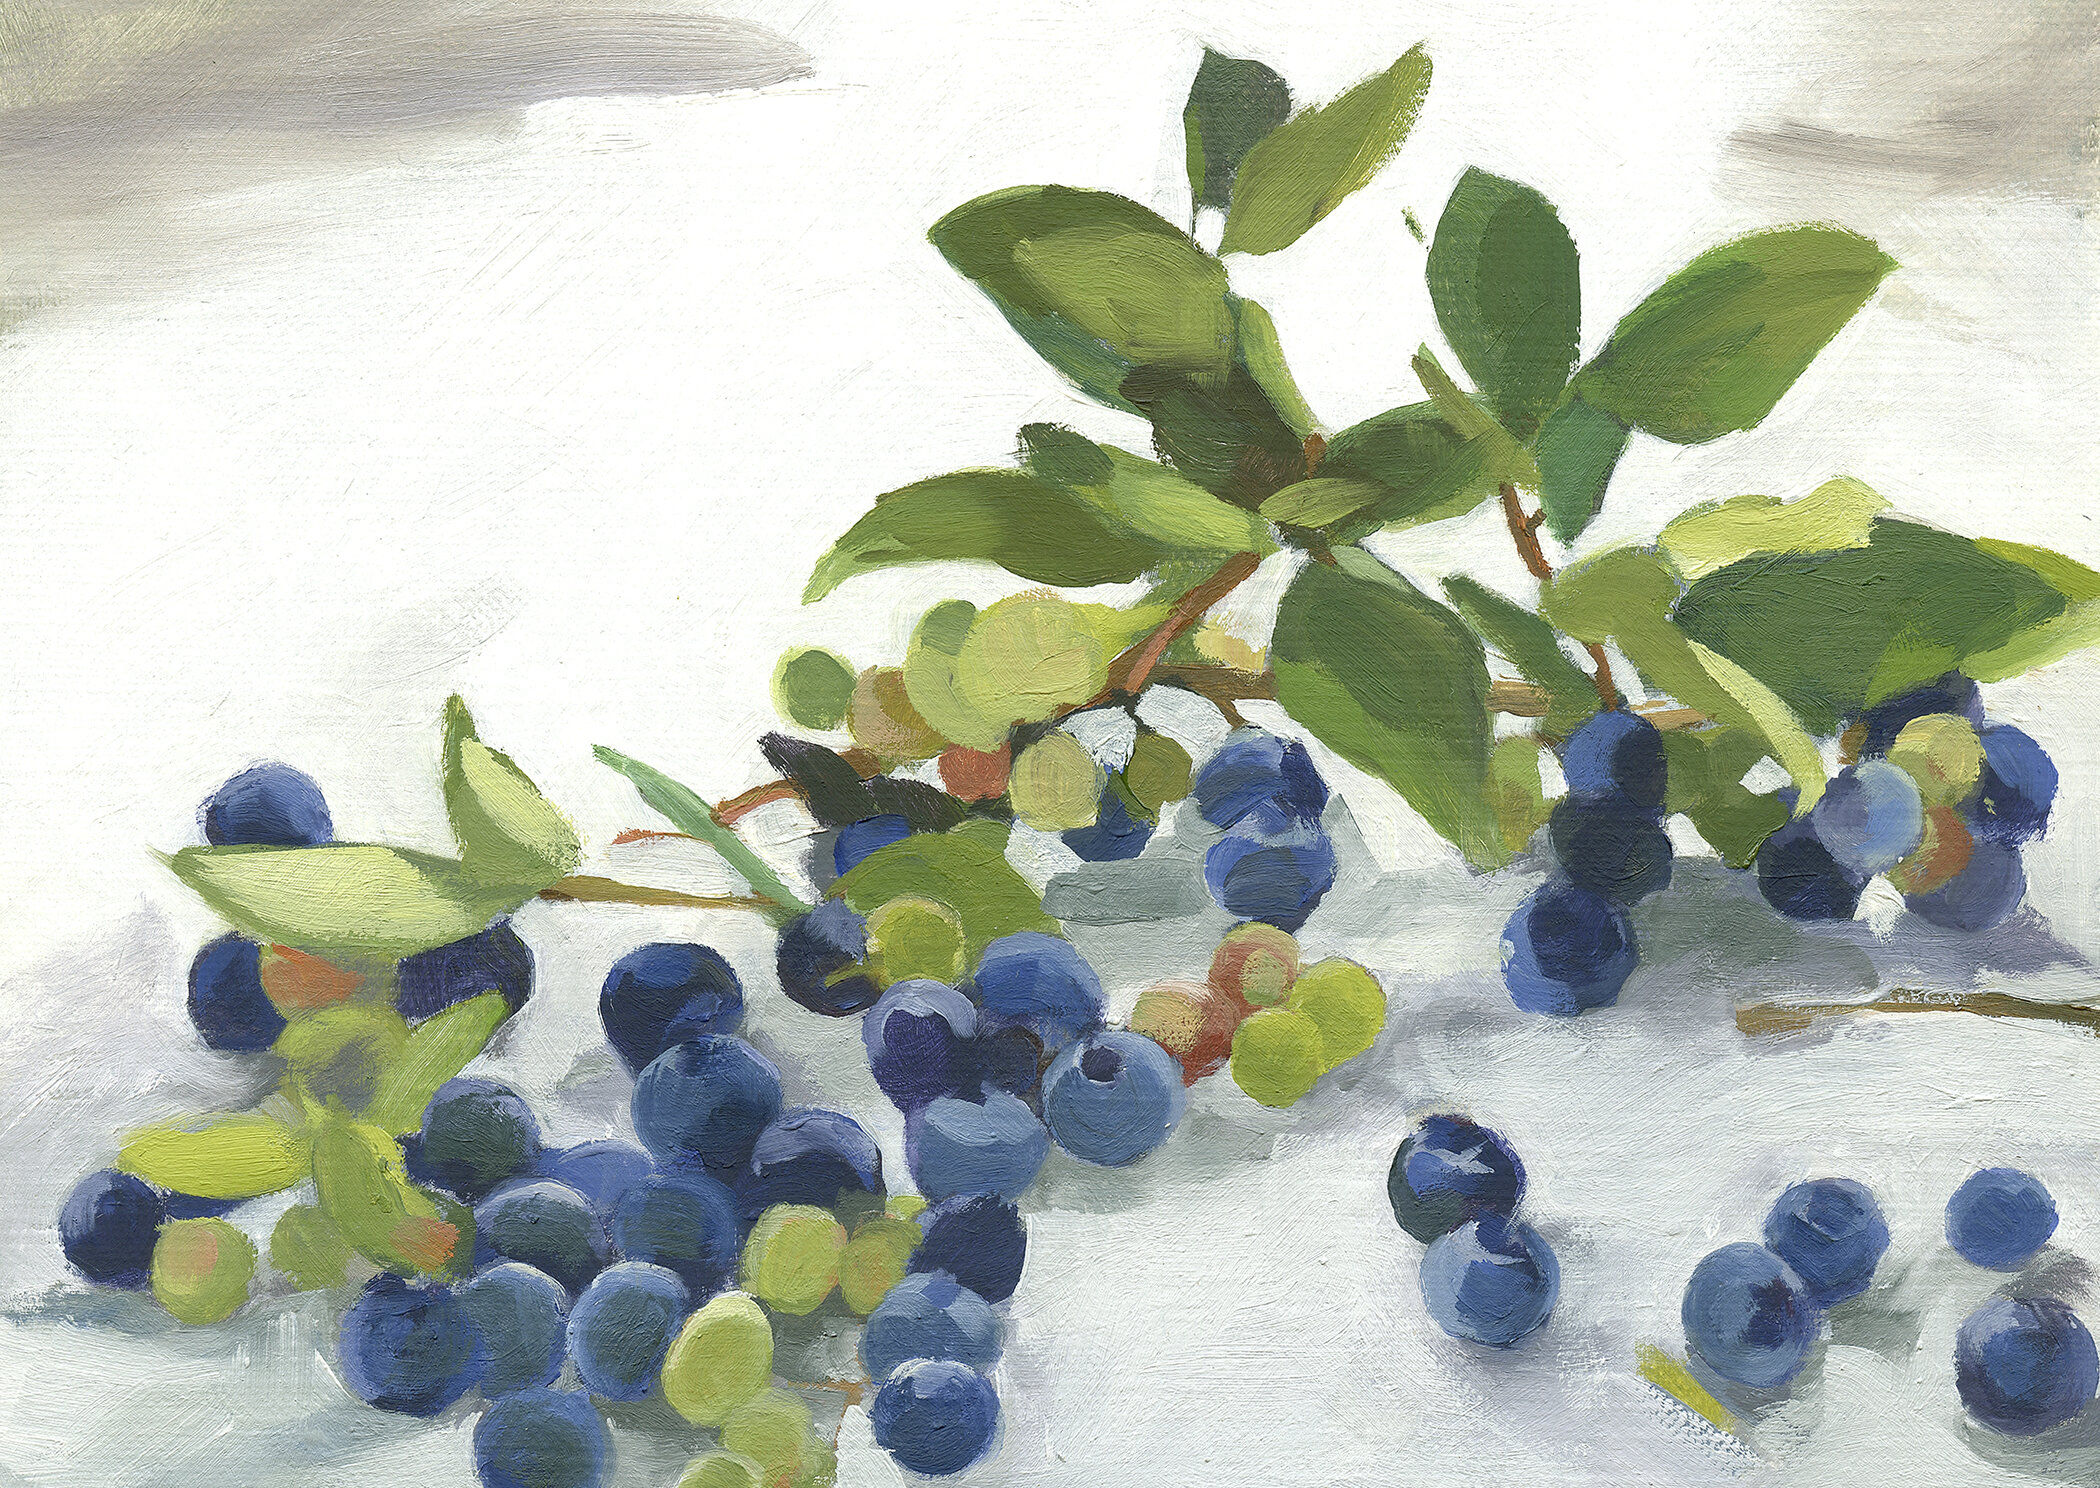 Just-picked Blueberries